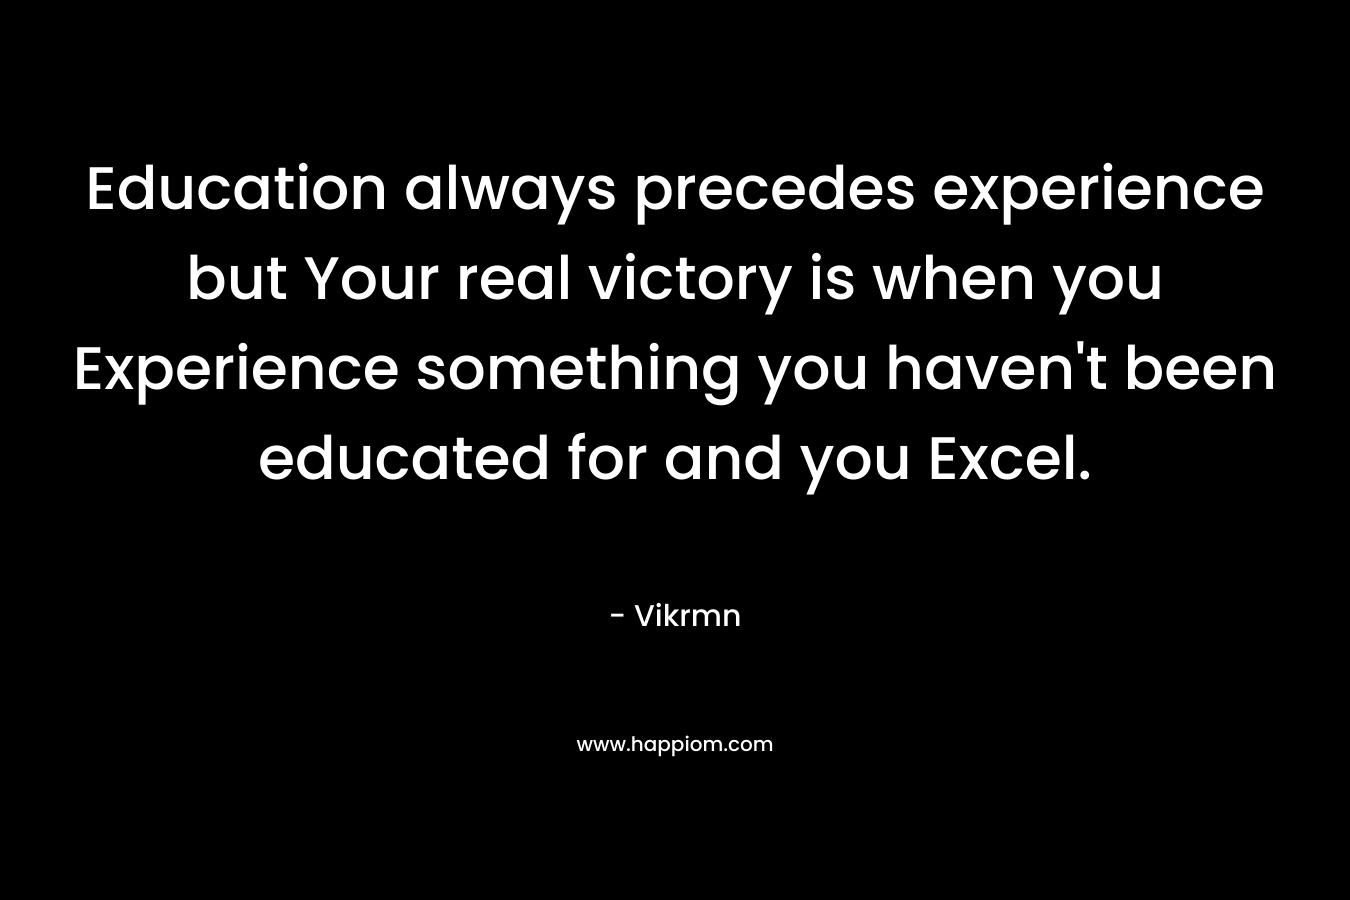 Education always precedes experience but Your real victory is when you Experience something you haven't been educated for and you Excel.